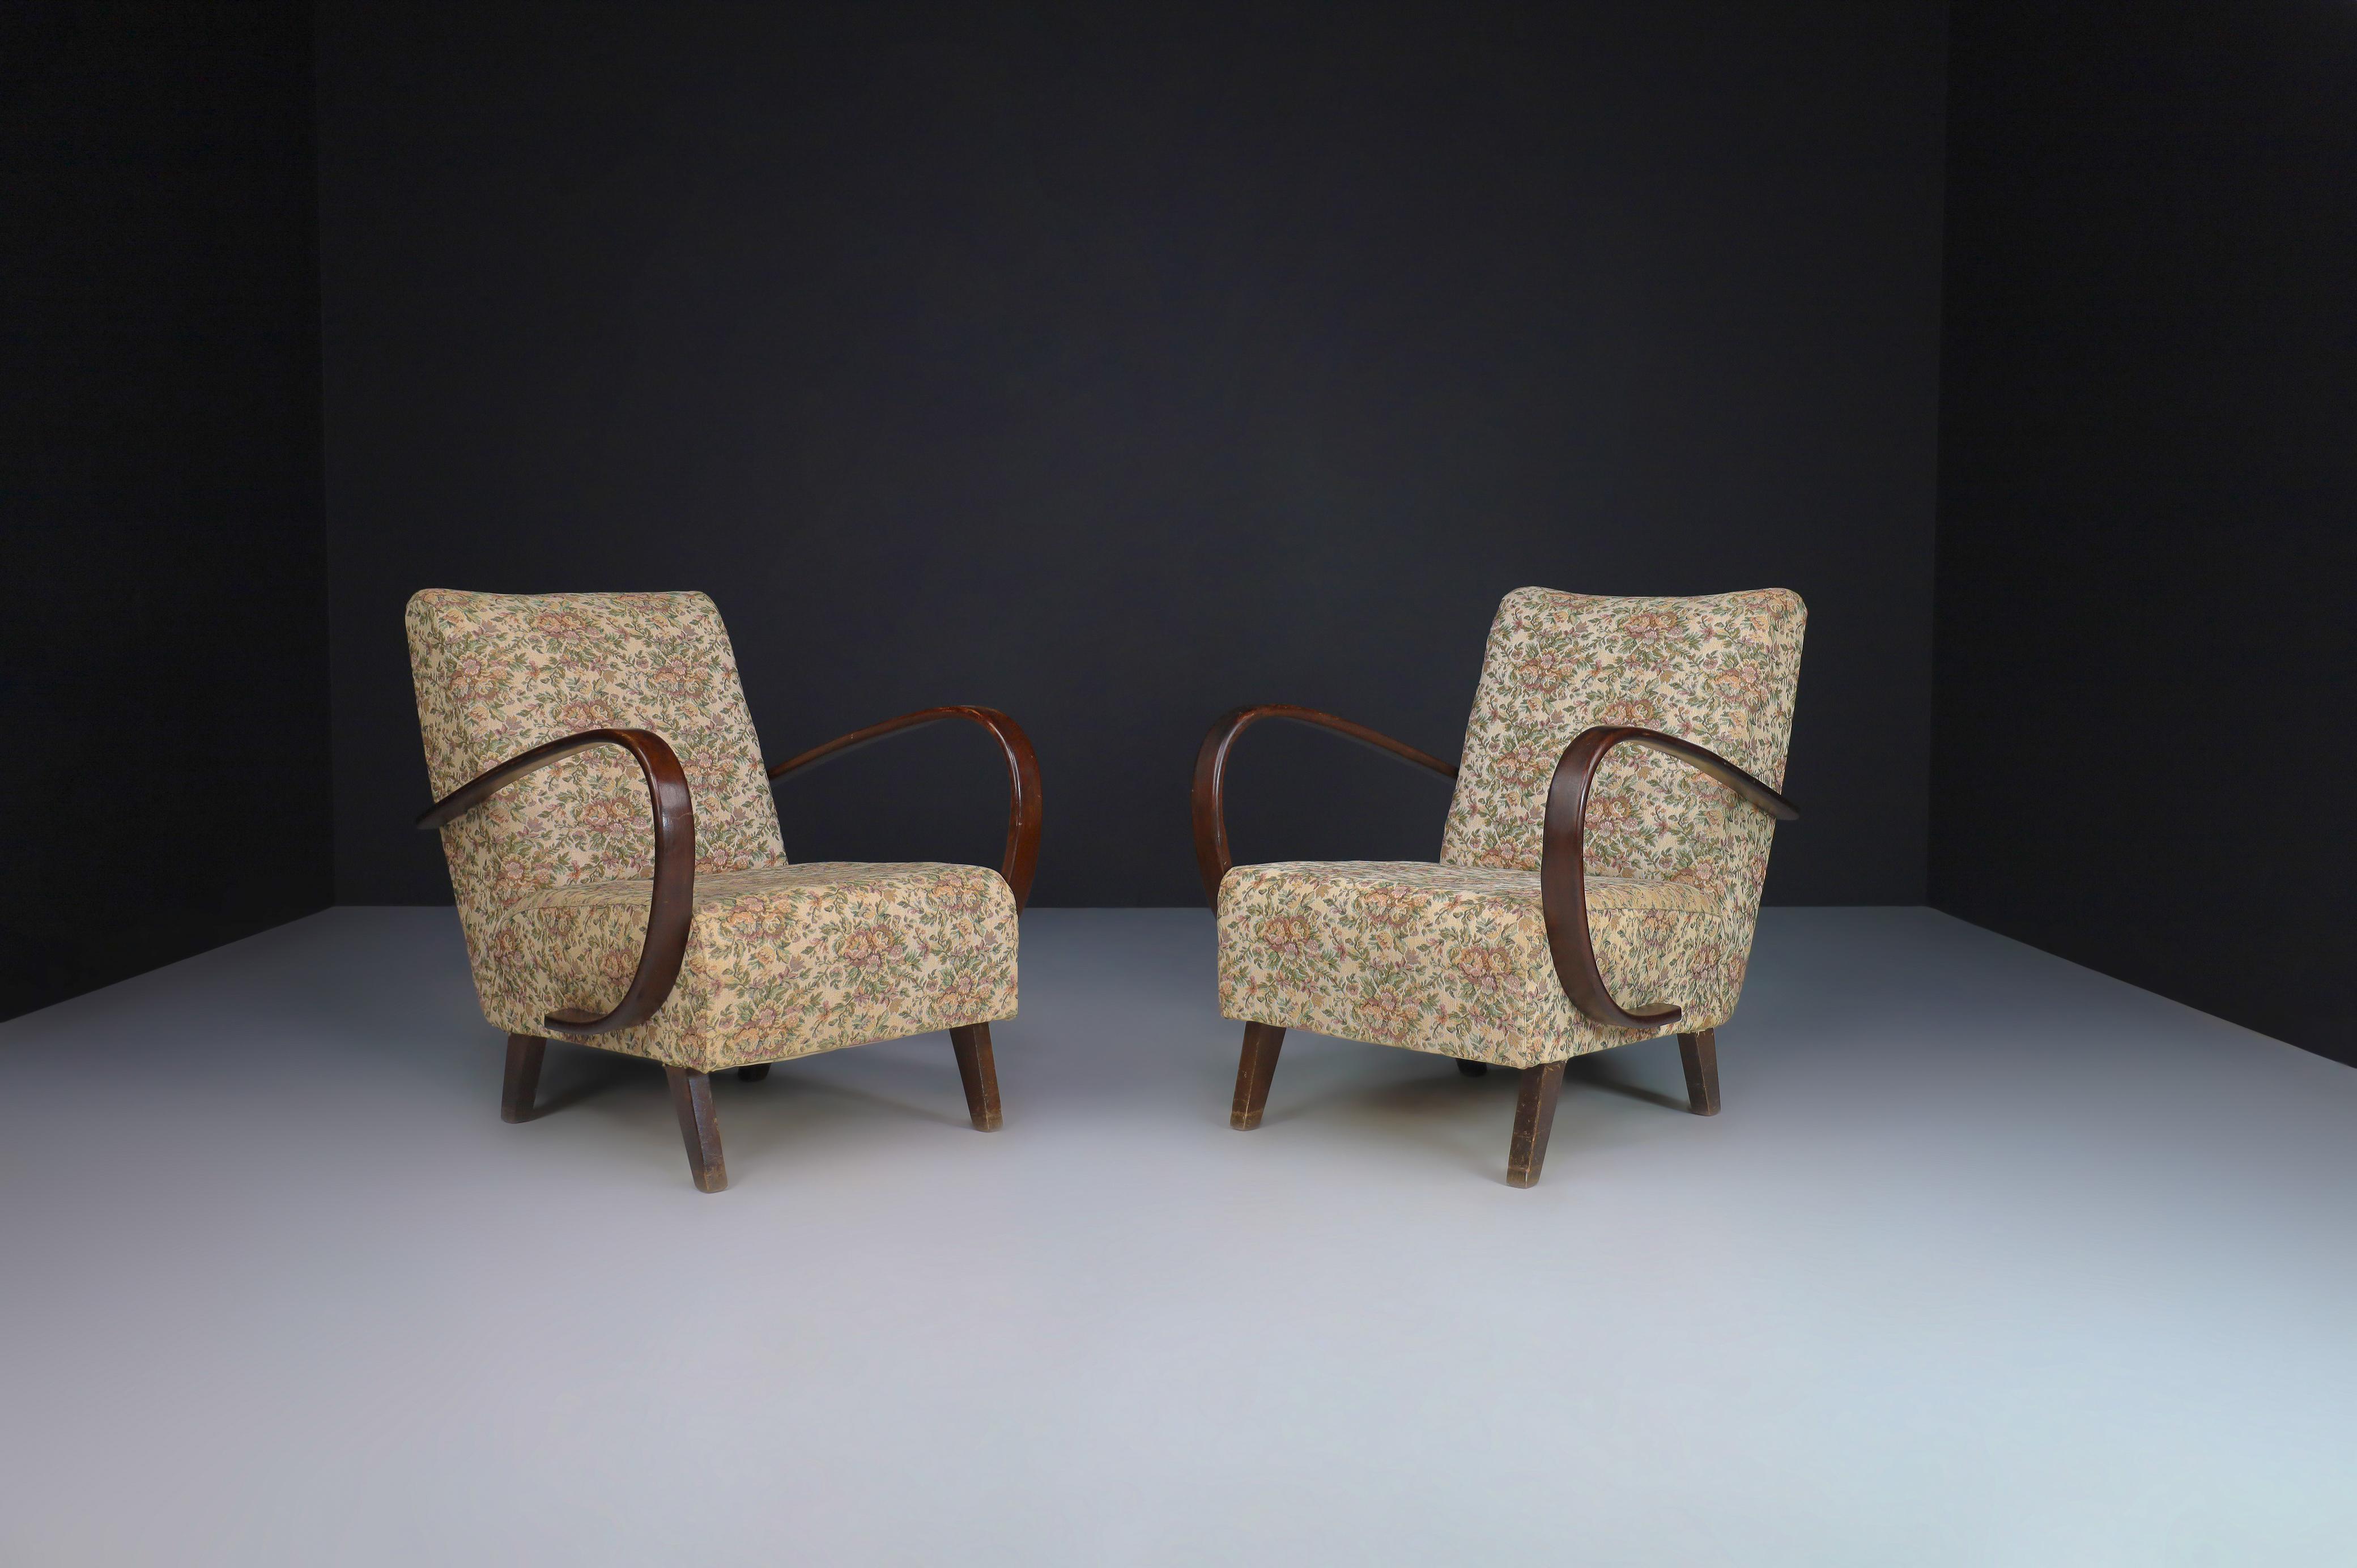 Jindrich Halabala bentwood armchairs with original floral upholstery, 1940s Czech Republic. 

Jindrich Halabala bentwood armchairs with original floral upholstery, 1940s Czech Republic. These iconic set chairs are from Czechia, circa 1940. They